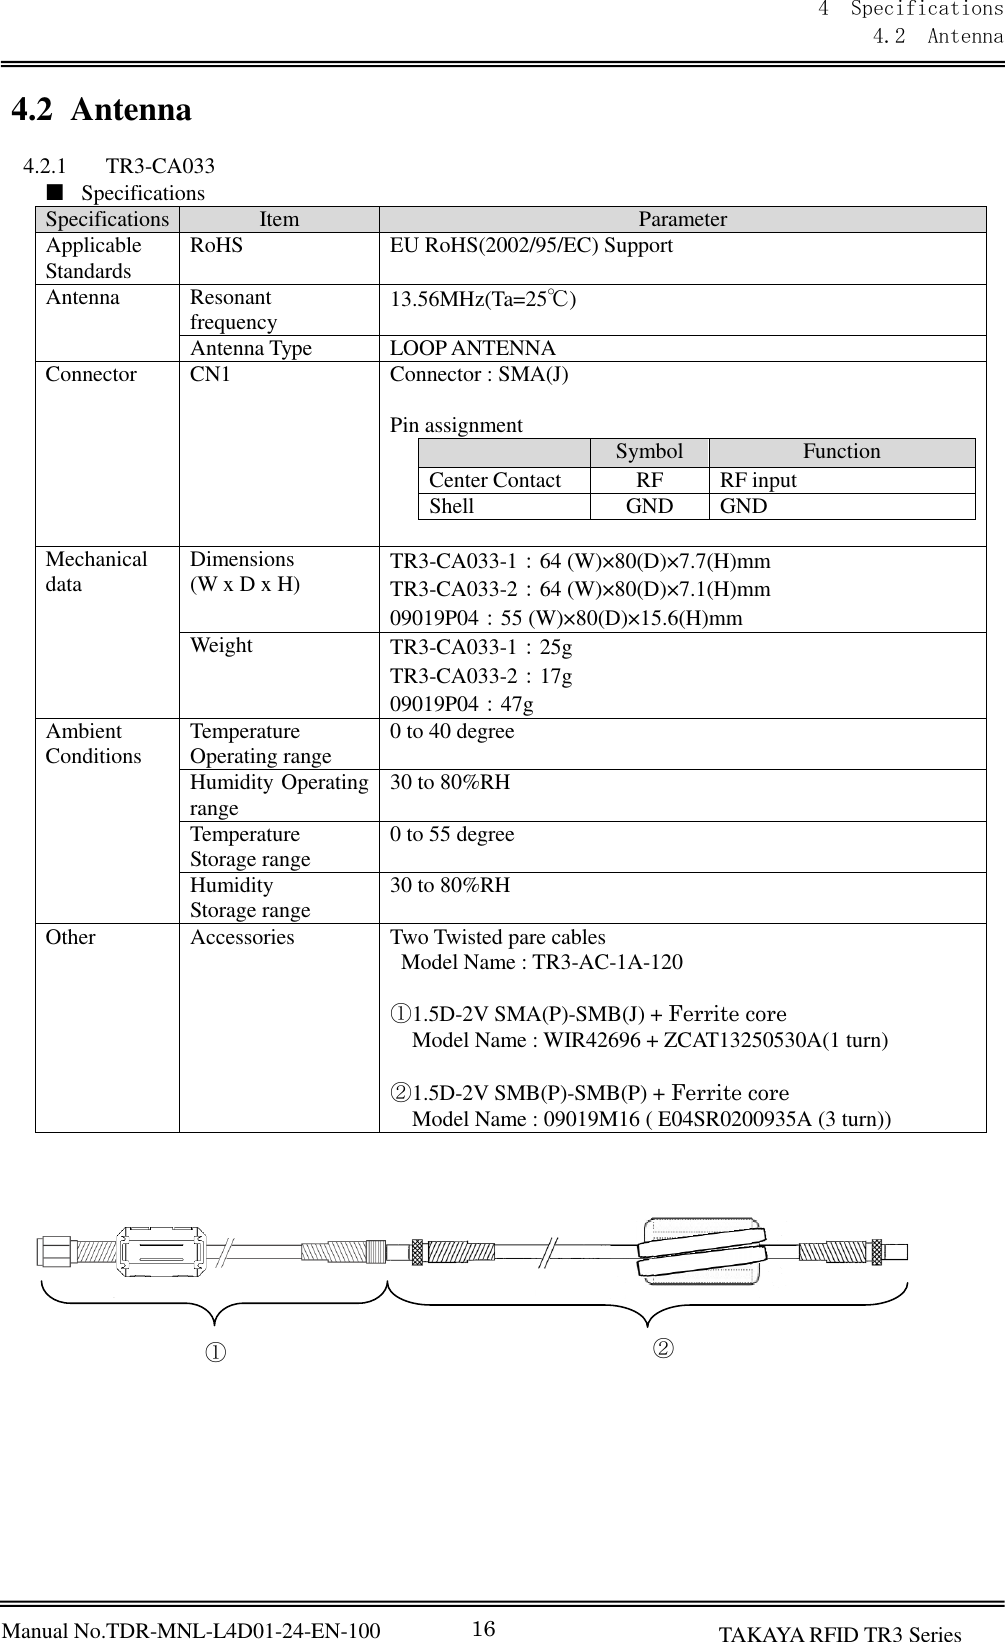 Manual No.TDR-MNL-L4D01-24-EN-100 4  Specifications 4.2  Antenna 16 TAKAYA RFID TR3 Series  4.2 Antenna  4.2.1 TR3-CA033 ■ Specifications Specifications Item Parameter Applicable Standards RoHS EU RoHS(2002/95/EC) Support Antenna Resonant frequency 13.56MHz(Ta=25℃) Antenna Type LOOP ANTENNA Connector CN1 Connector : SMA(J)  Pin assignment  Symbol Function Center Contact RF RF input Shell GND GND    Mechanical data Dimensions (W x D x H) TR3-CA033-1：64 (W)×80(D)×7.7(H)mm TR3-CA033-2：64 (W)×80(D)×7.1(H)mm 09019P04：55 (W)×80(D)×15.6(H)mm Weight TR3-CA033-1：25g TR3-CA033-2：17g 09019P04：47g Ambient Conditions Temperature Operating range 0 to 40 degree Humidity Operating range 30 to 80%RH Temperature Storage range 0 to 55 degree Humidity Storage range 30 to 80%RH Other Accessories Two Twisted pare cables   Model Name : TR3-AC-1A-120  ①1.5D-2V SMA(P)-SMB(J) + Ferrite core Model Name : WIR42696 + ZCAT13250530A(1 turn)  ②1.5D-2V SMB(P)-SMB(P) + Ferrite core Model Name : 09019M16 ( E04SR0200935A (3 turn))                  ① ② 